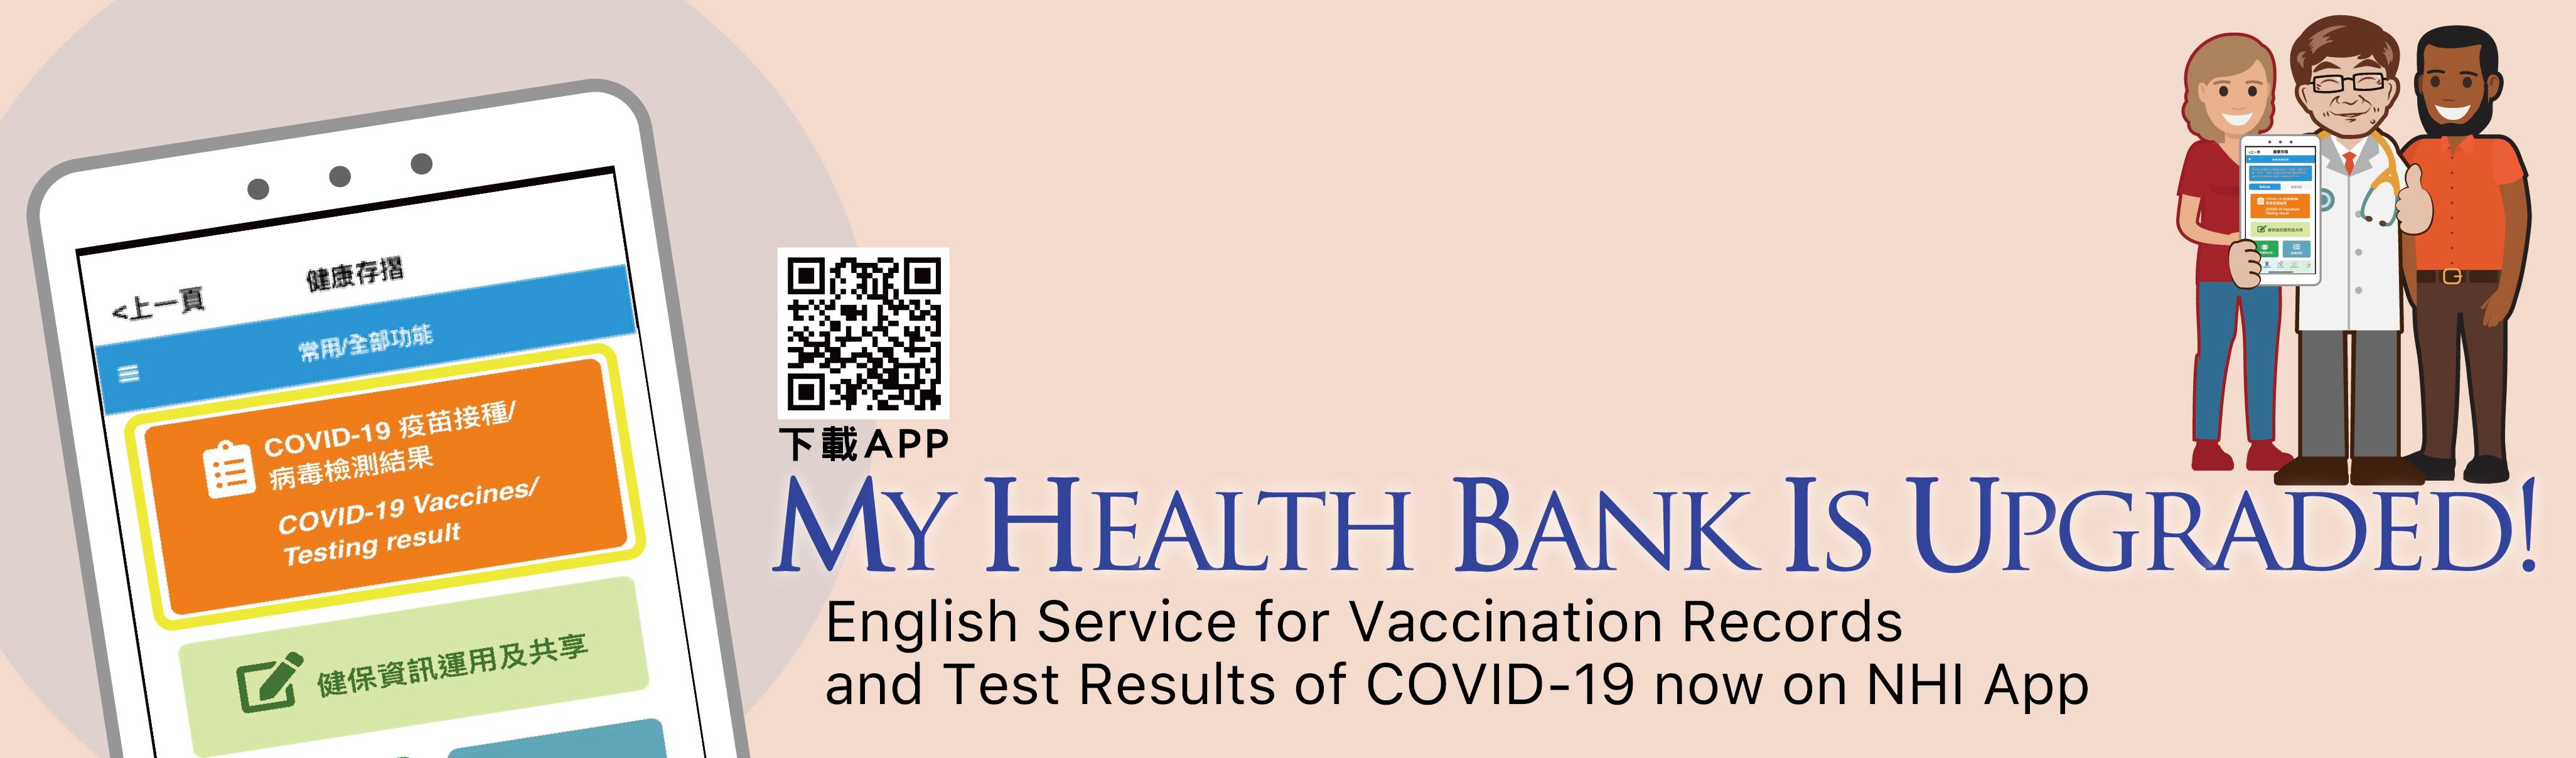 My Health Bank Is Upgraded! English Service for Vaccination Records and Test Results of COVID-19 now on NHI App